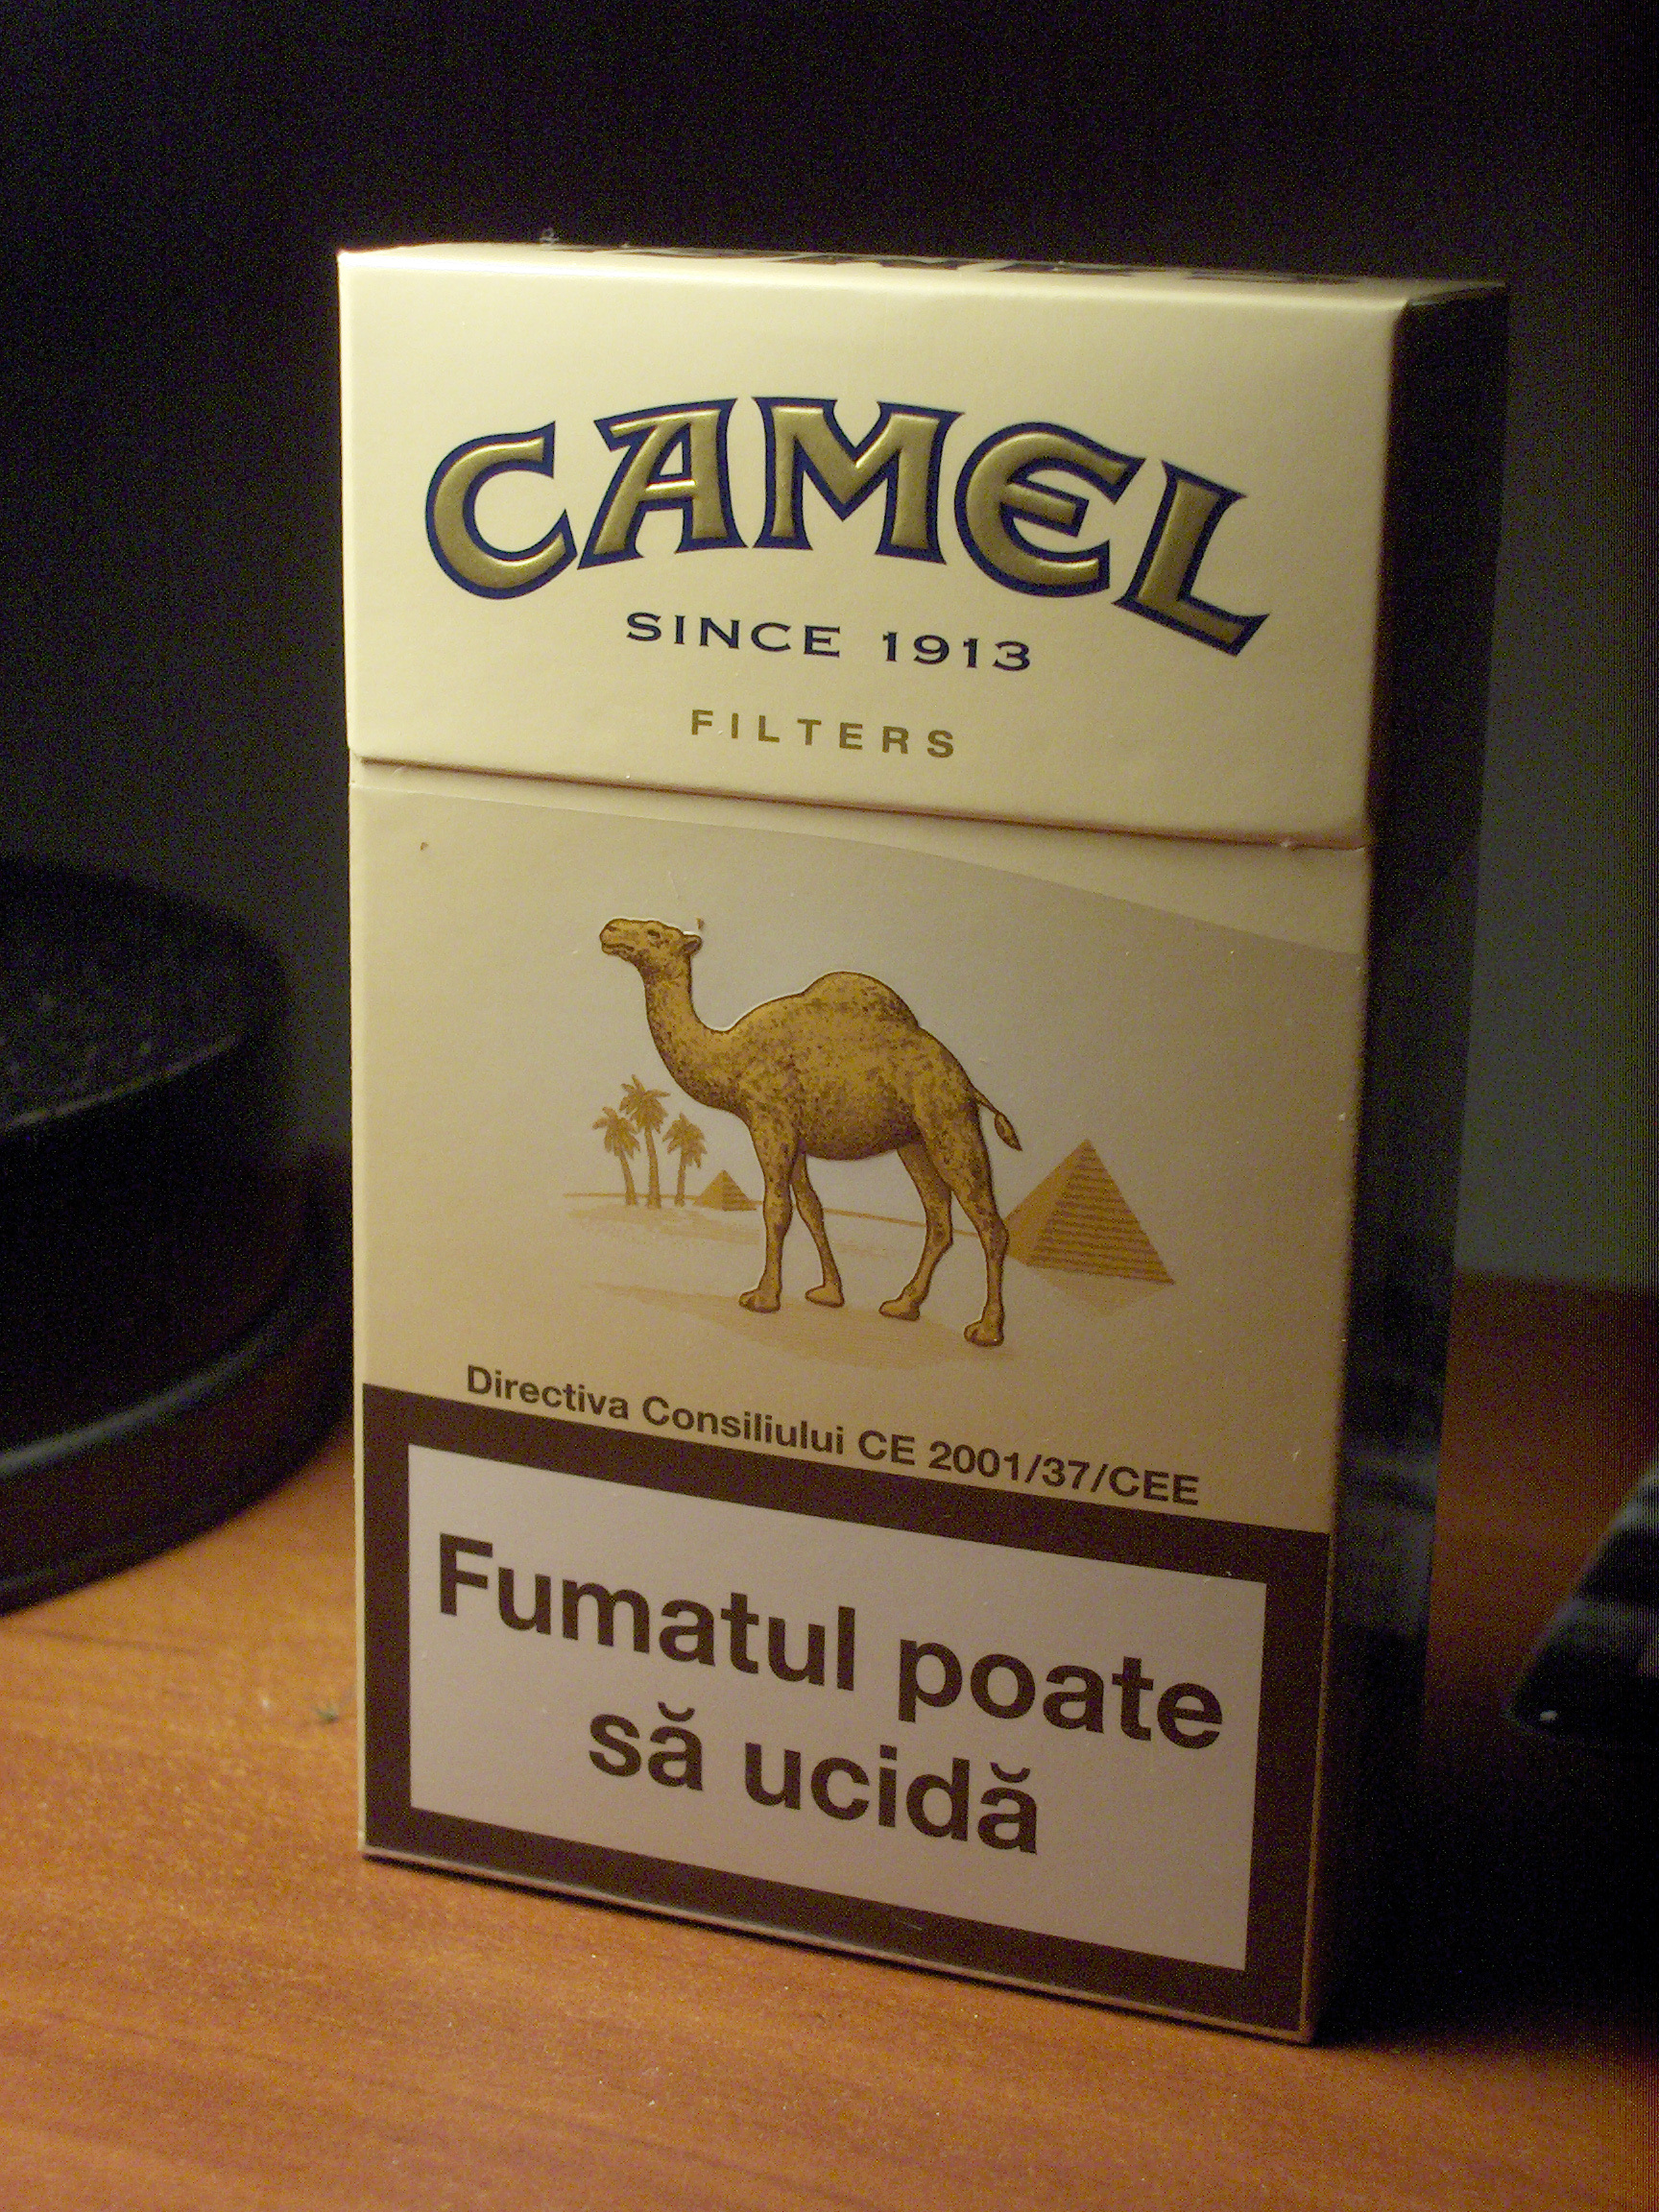 HOW MUCH ARE CAMEL CIGARETTES